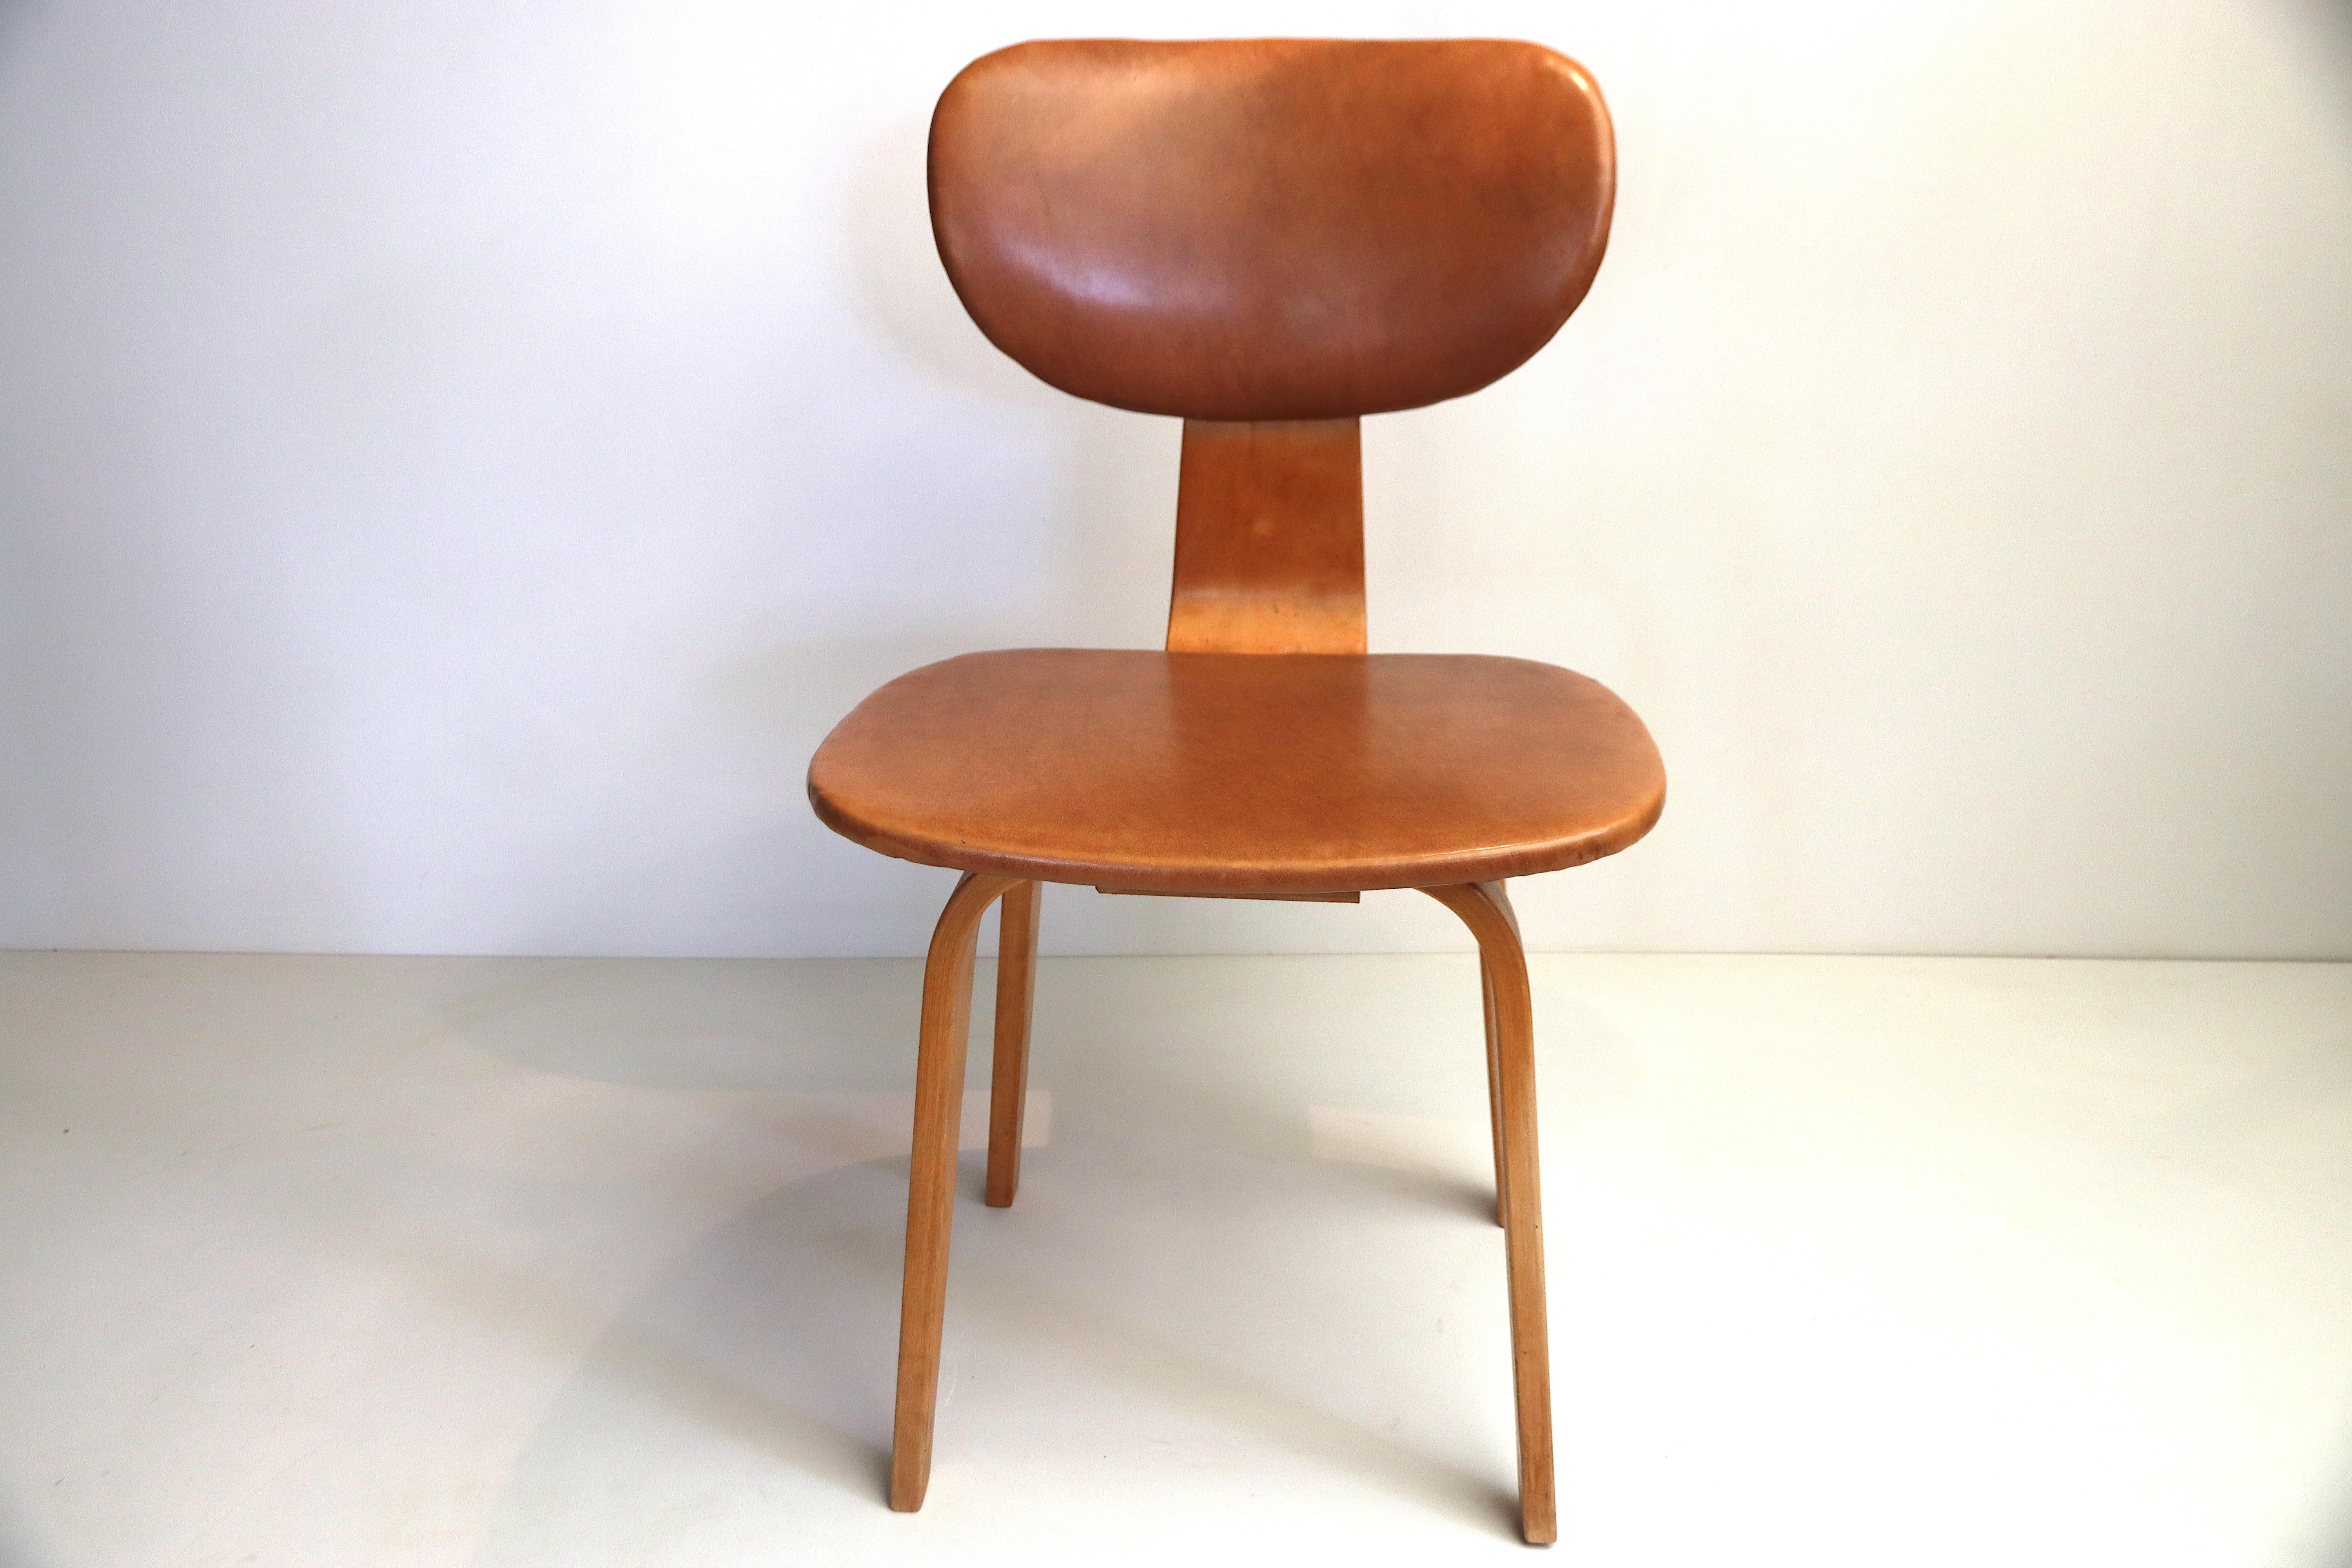 Mid-Century Modern Plywood Desk or Side Chair by Cees Braakman for Pastoe Inspired by Eames, Dutch For Sale